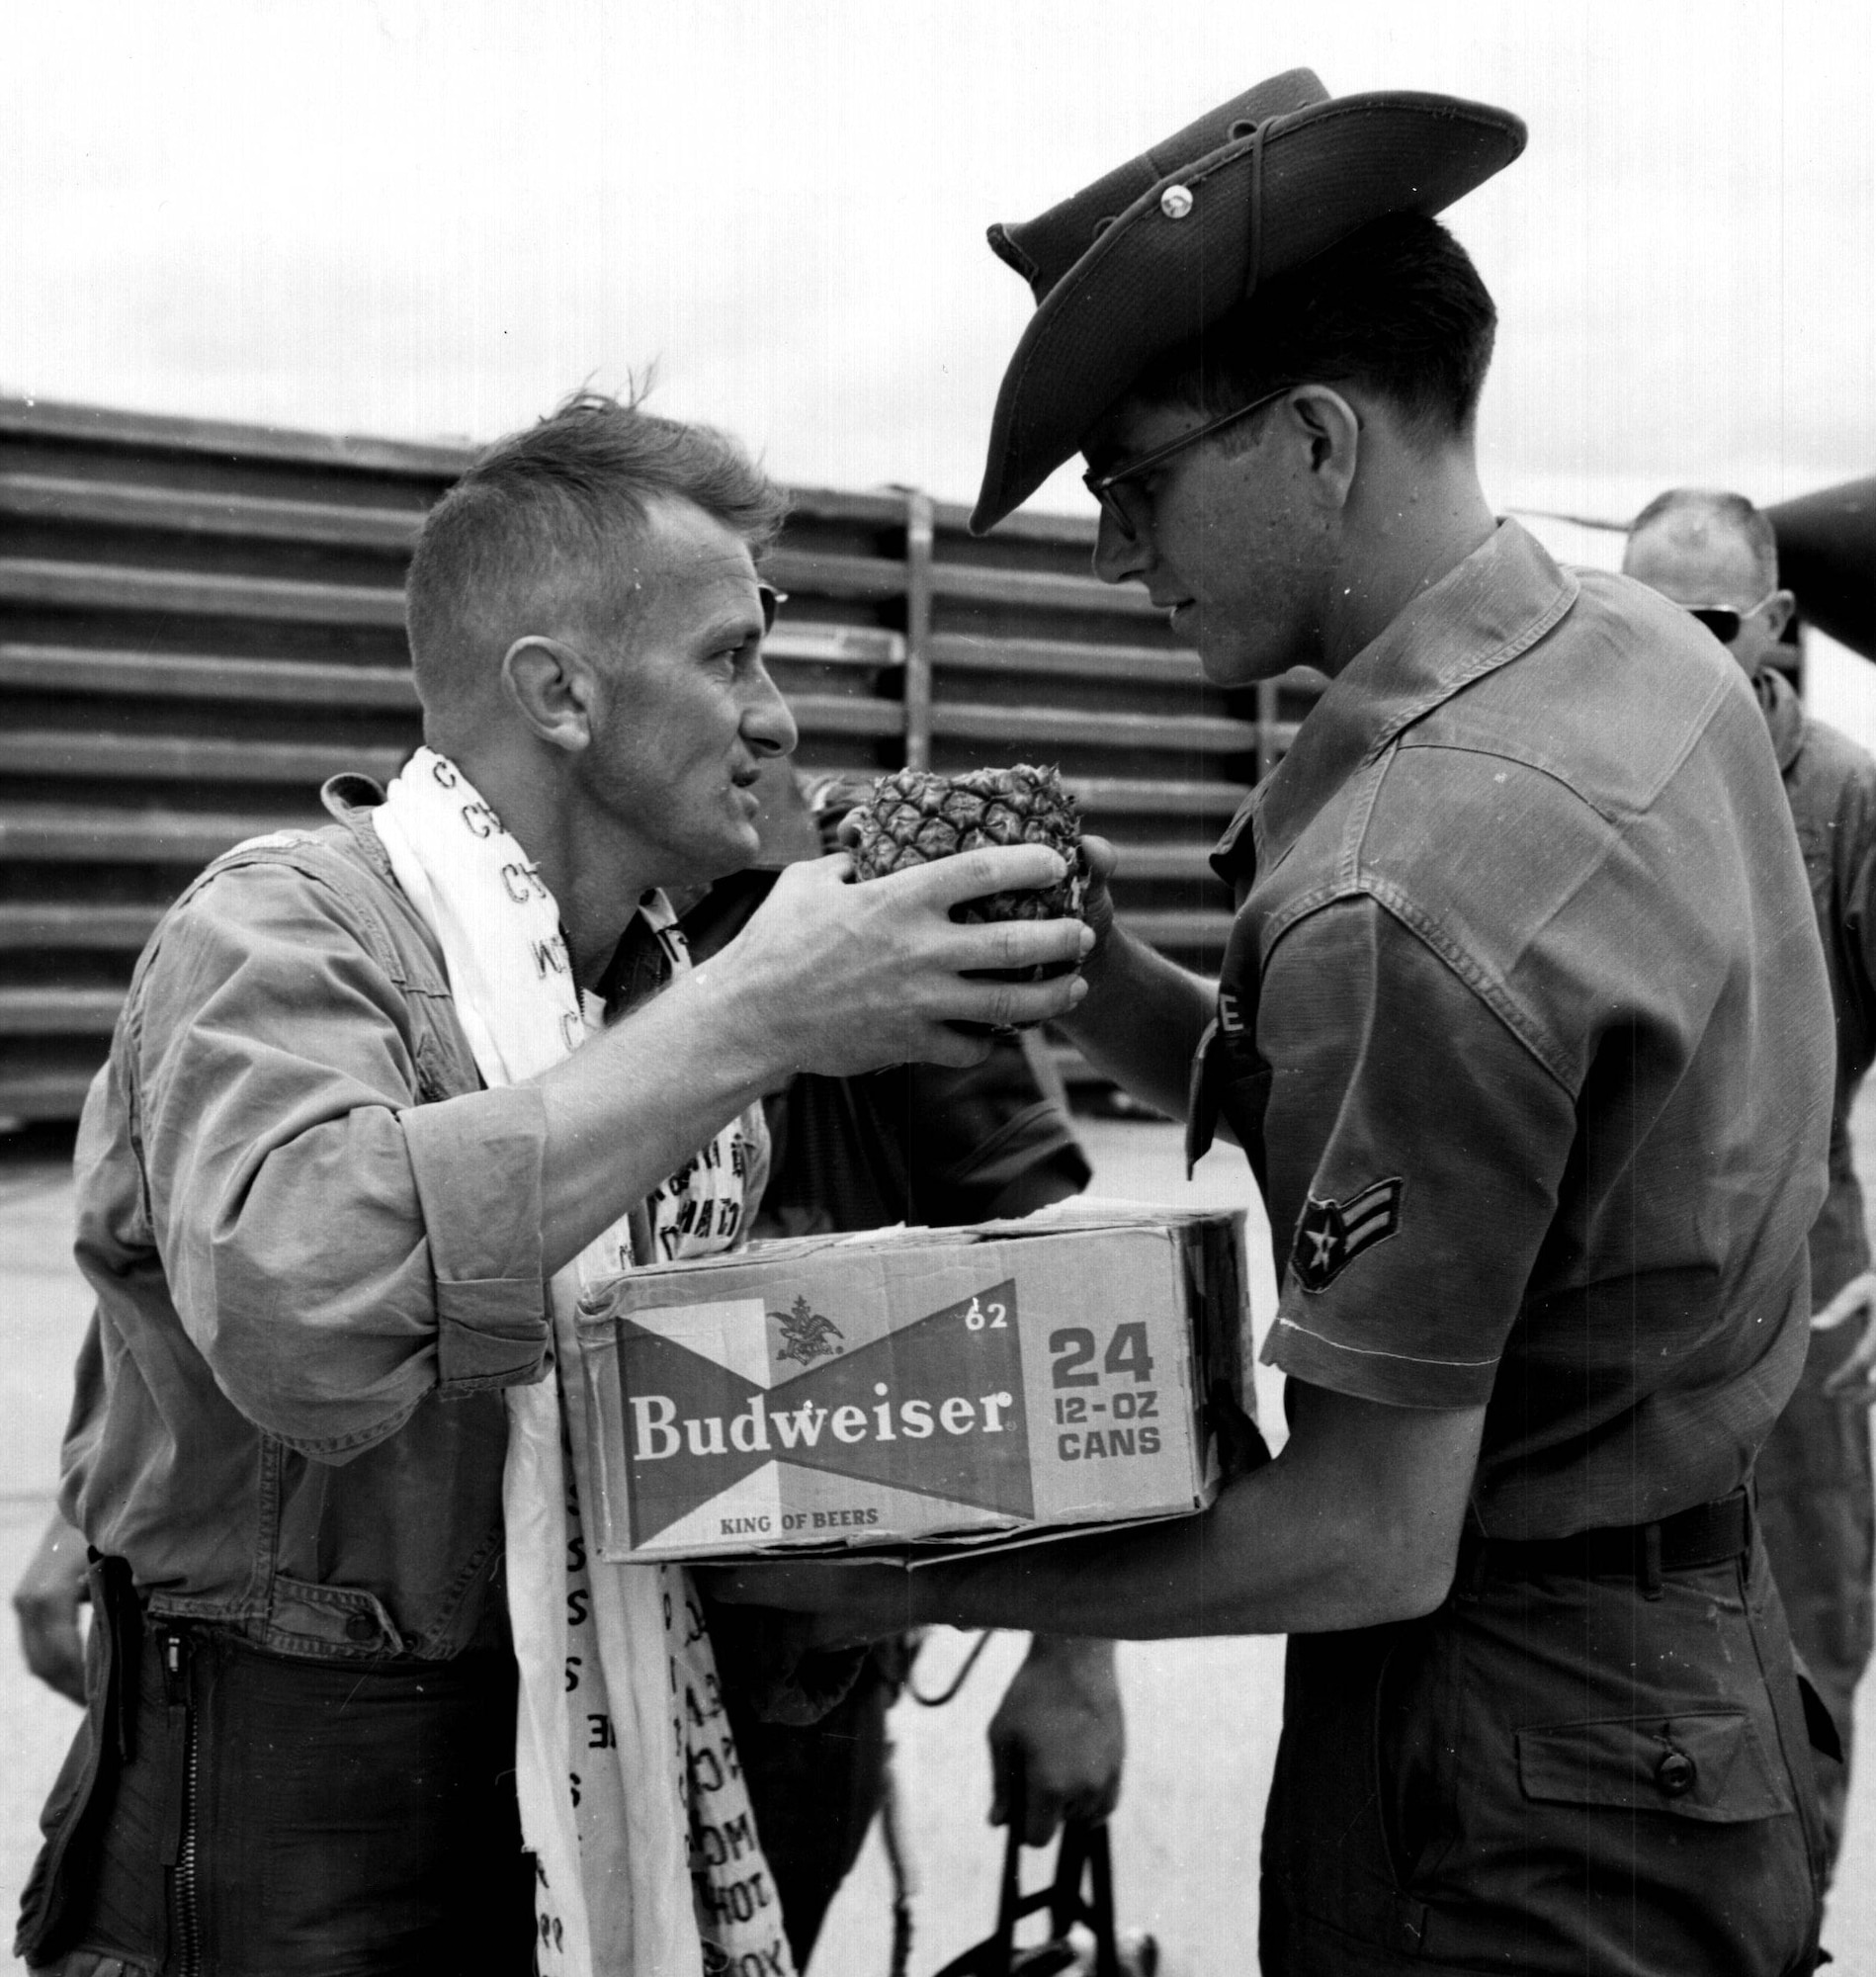 Retired U.S. Air Force Lt. Col. Harry Pawlik accepts gifts after his final flight at Korat Air Base, Thailand in Aug. 1967. Pawlik commissioned into the Air Force as a fighter pilot in 1955 and retired in 1980. He flew seven different aircraft at 12 different Air Force bases. (Courtesy Photo)